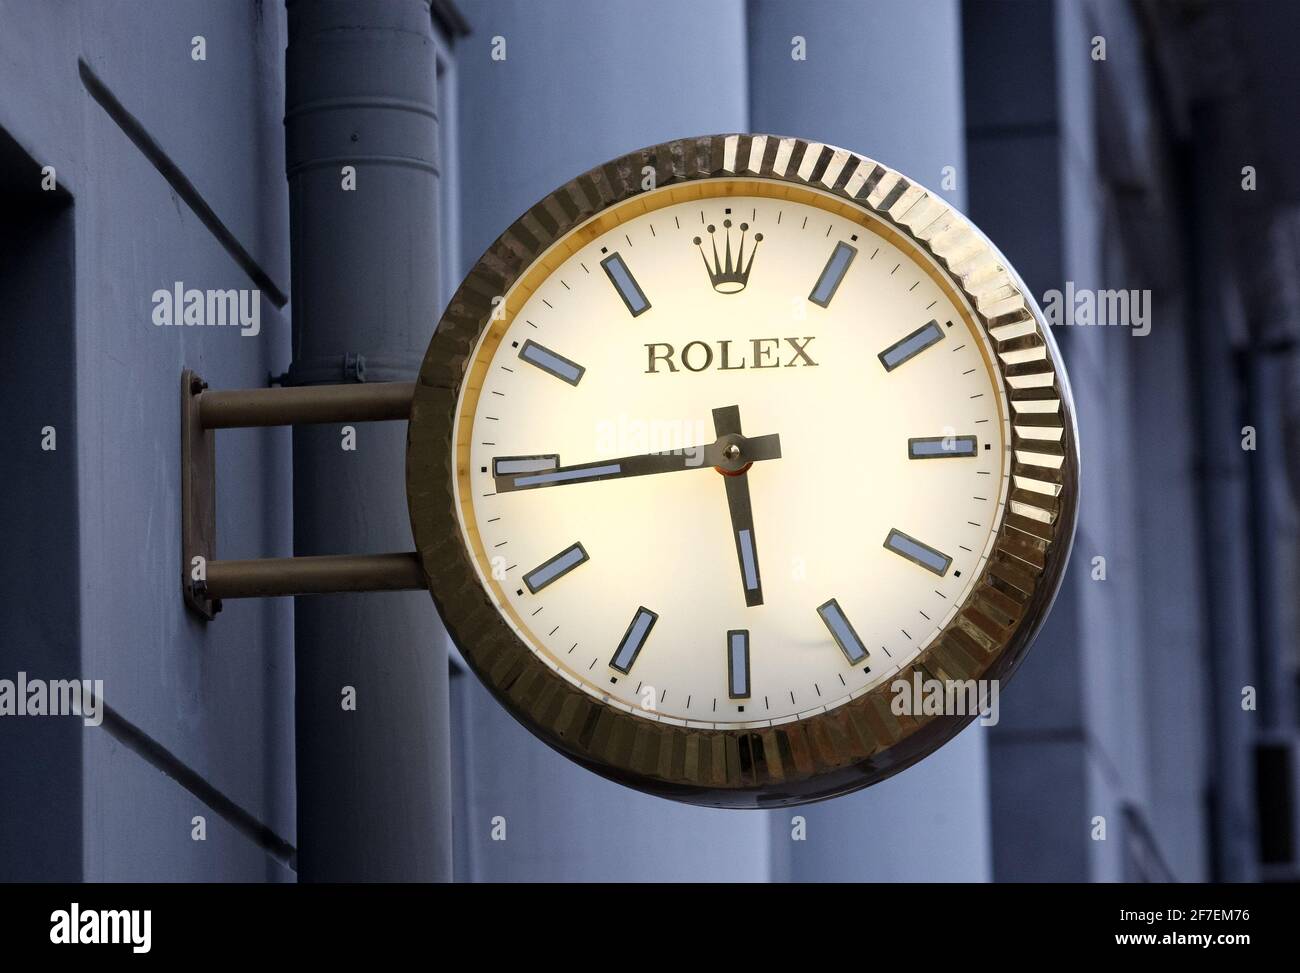 Kiev, Ukraine. 06th Apr, 2021. Rolex logo of a luxury watch manufacturer is  seen on a watch placed over the entrance to their brand store in Kiev.  Credit: SOPA Images Limited/Alamy Live